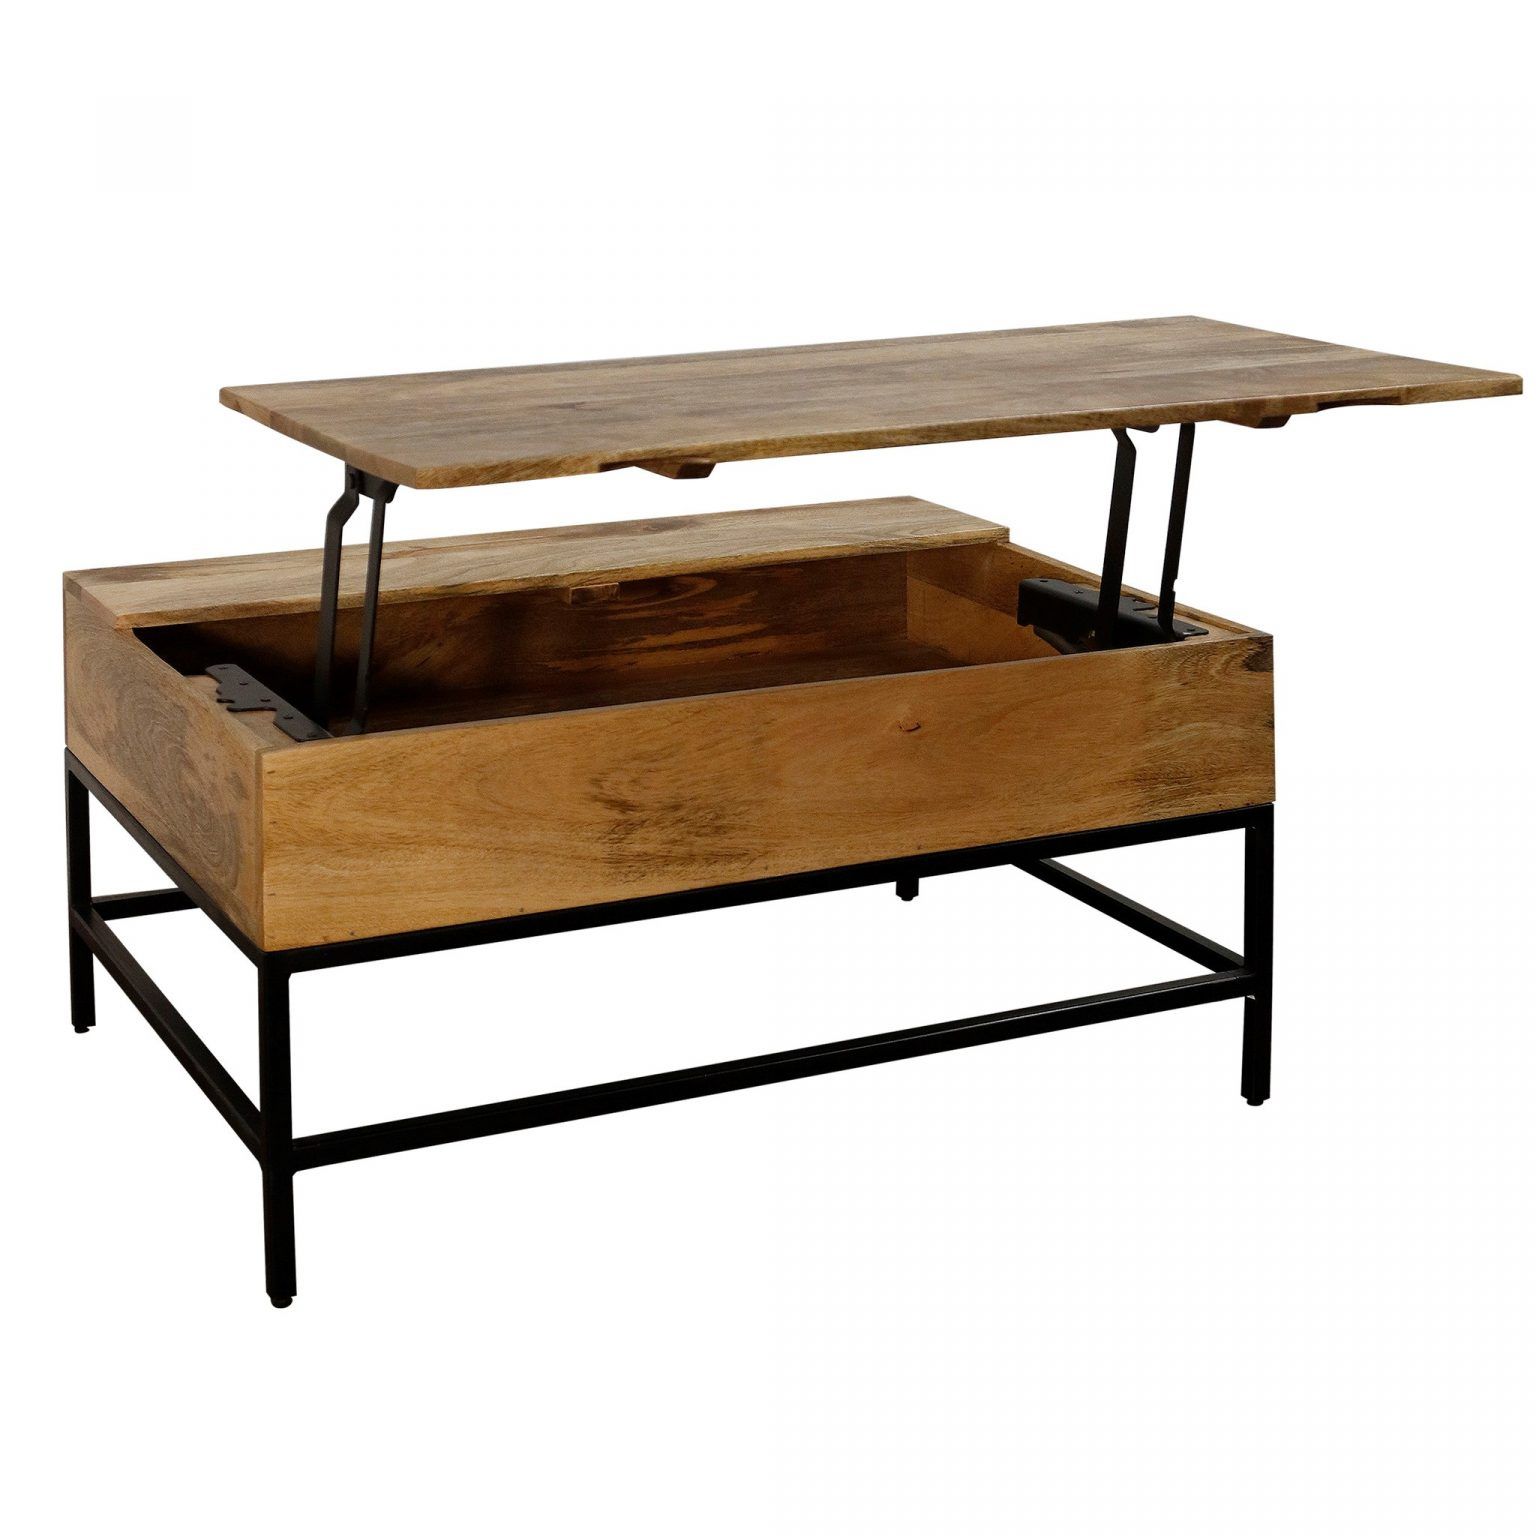 Solid Mango Wood Split Lift Top Storage Coffee Table In A With Regard To Natural Mango Wood Coffee Tables (View 3 of 15)